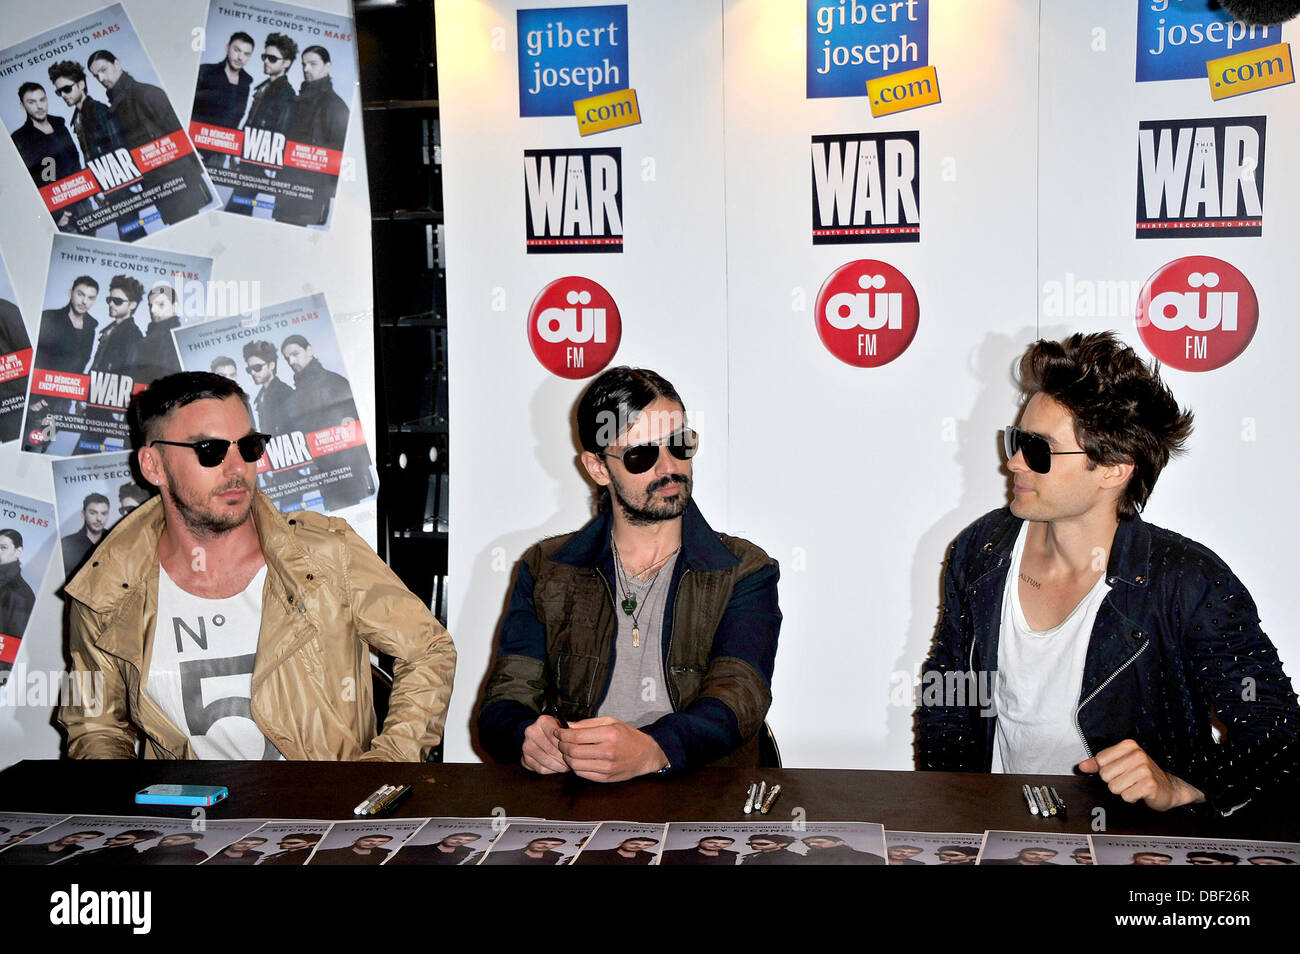 Shannon Leto, Tomo Milicevic, Jared Leto auf 30 Seconds To Mars "This Is War" CD signing bei Gibert Joseph. Paris, Frankreich - 07.06.11 Stockfoto